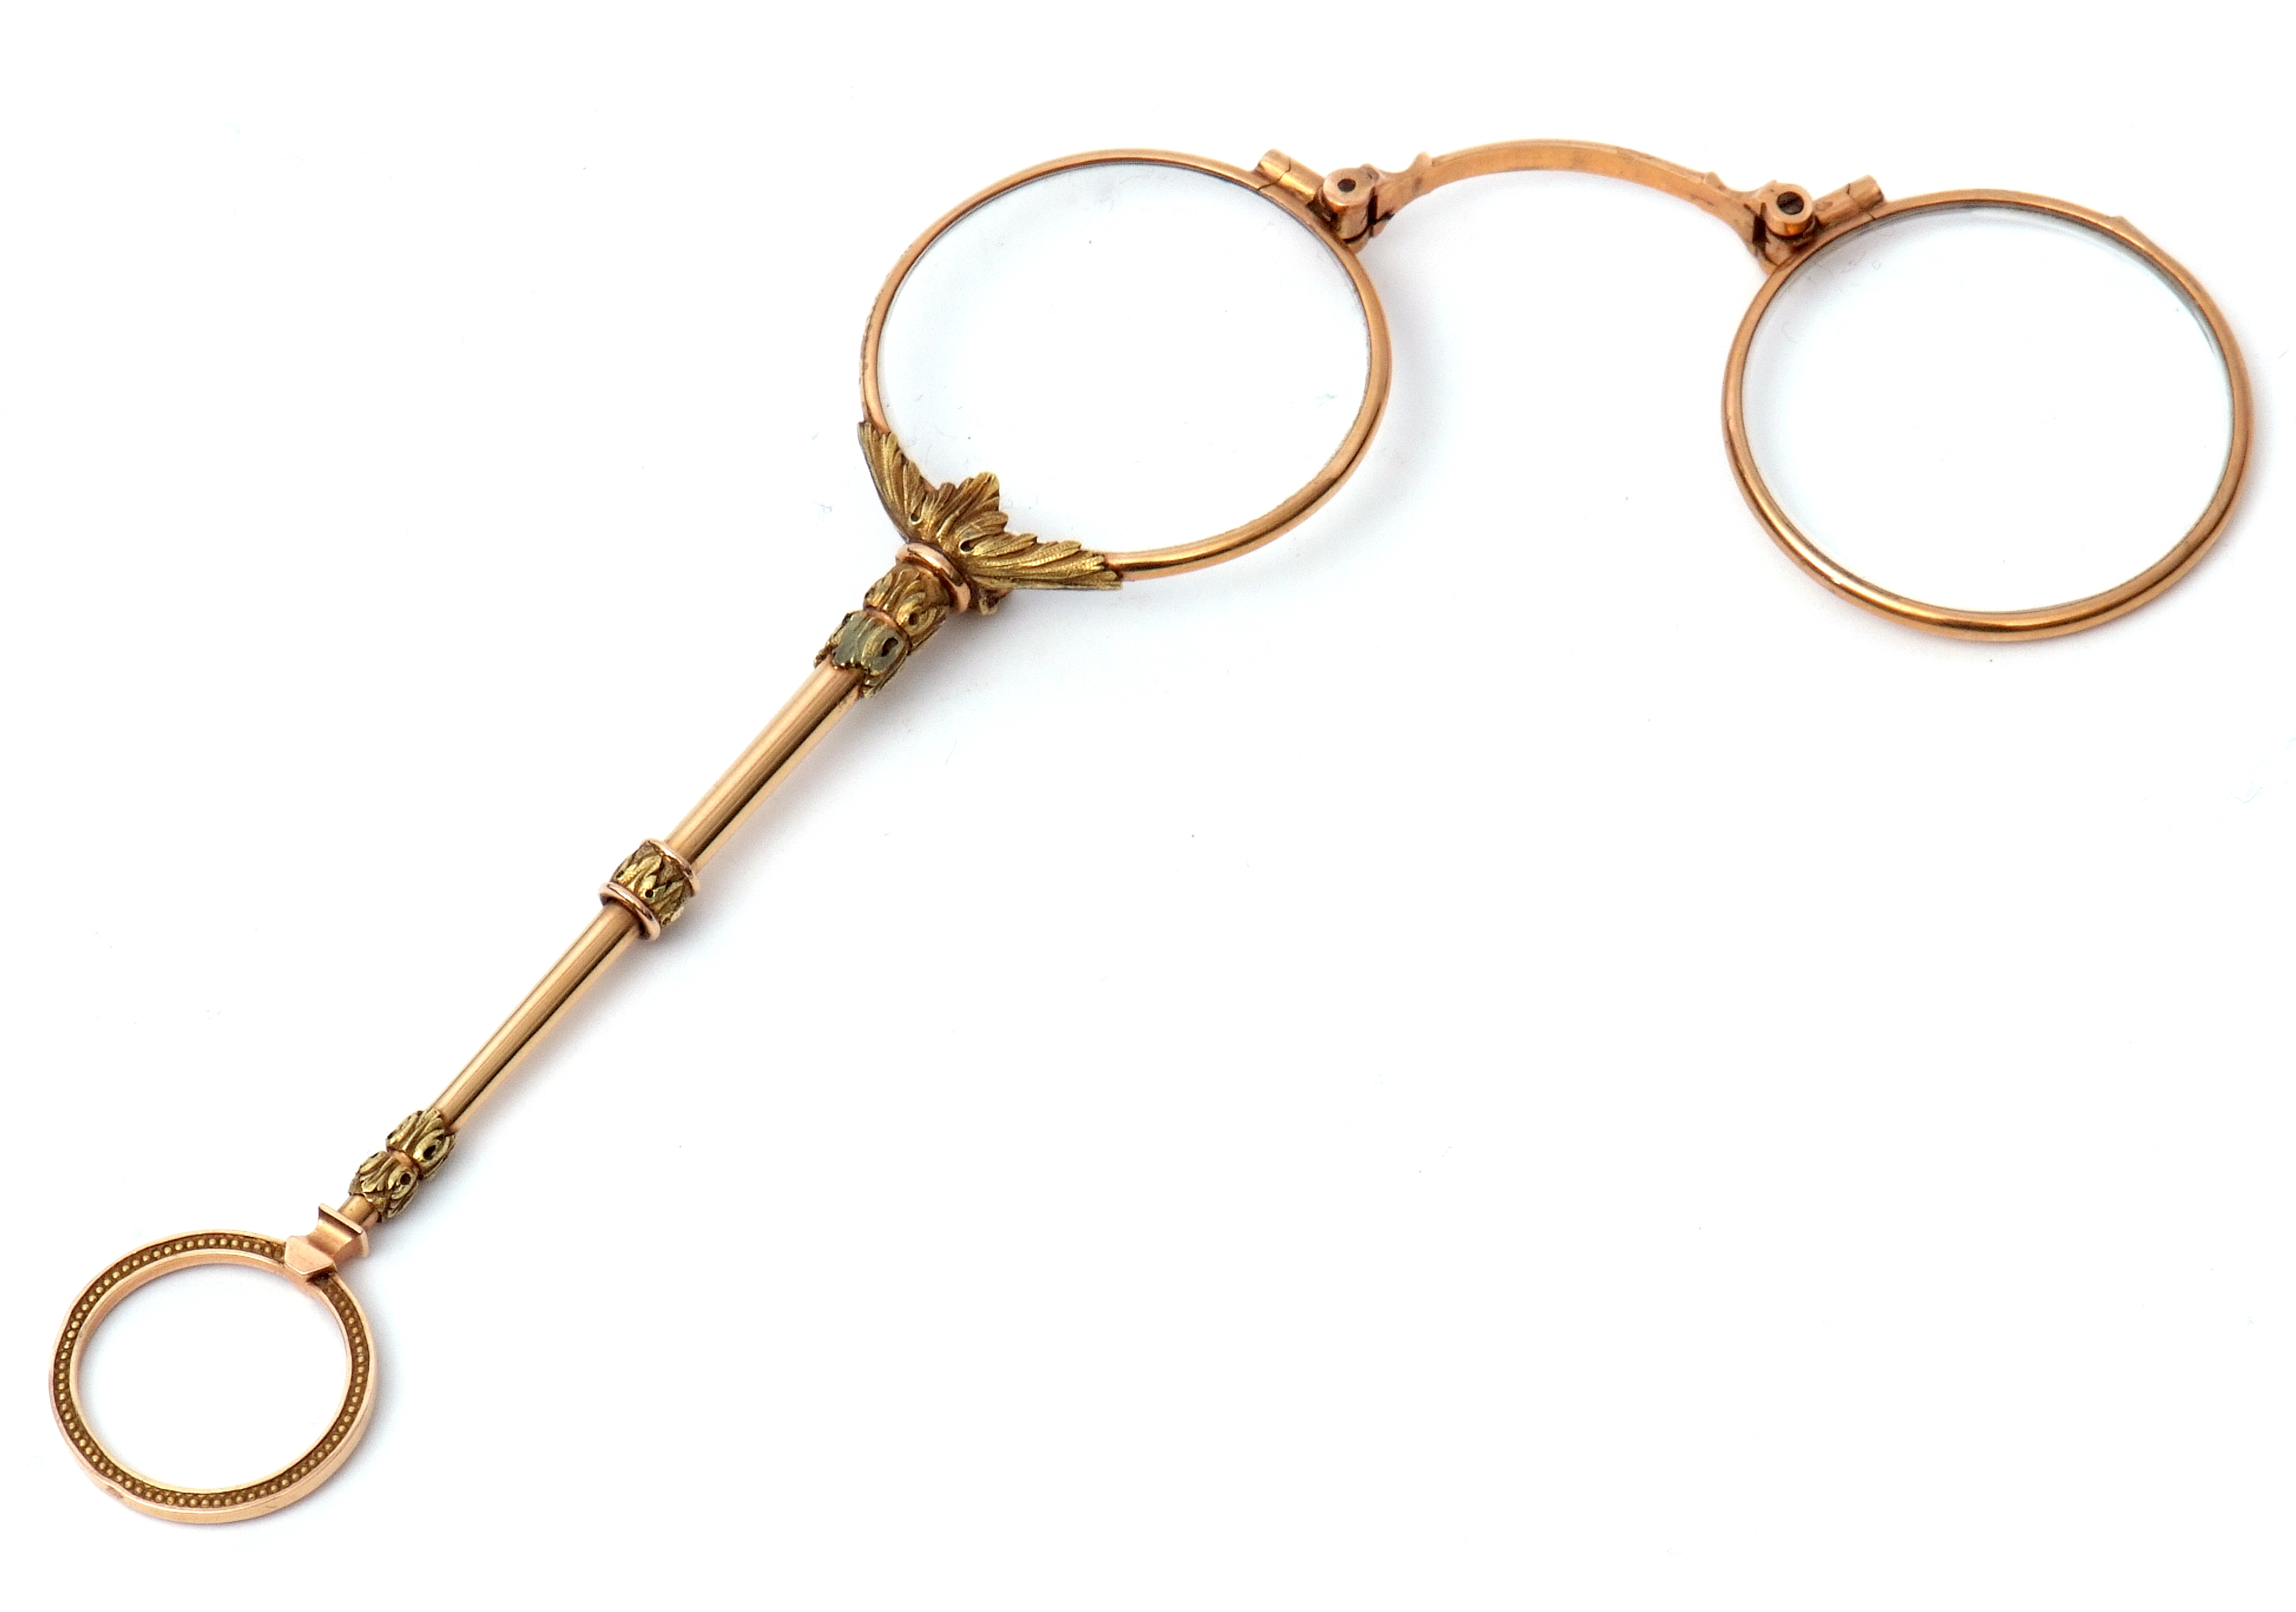 Pair of late 19th century French gold lorgnettes, the frames and ring turned handle marked with